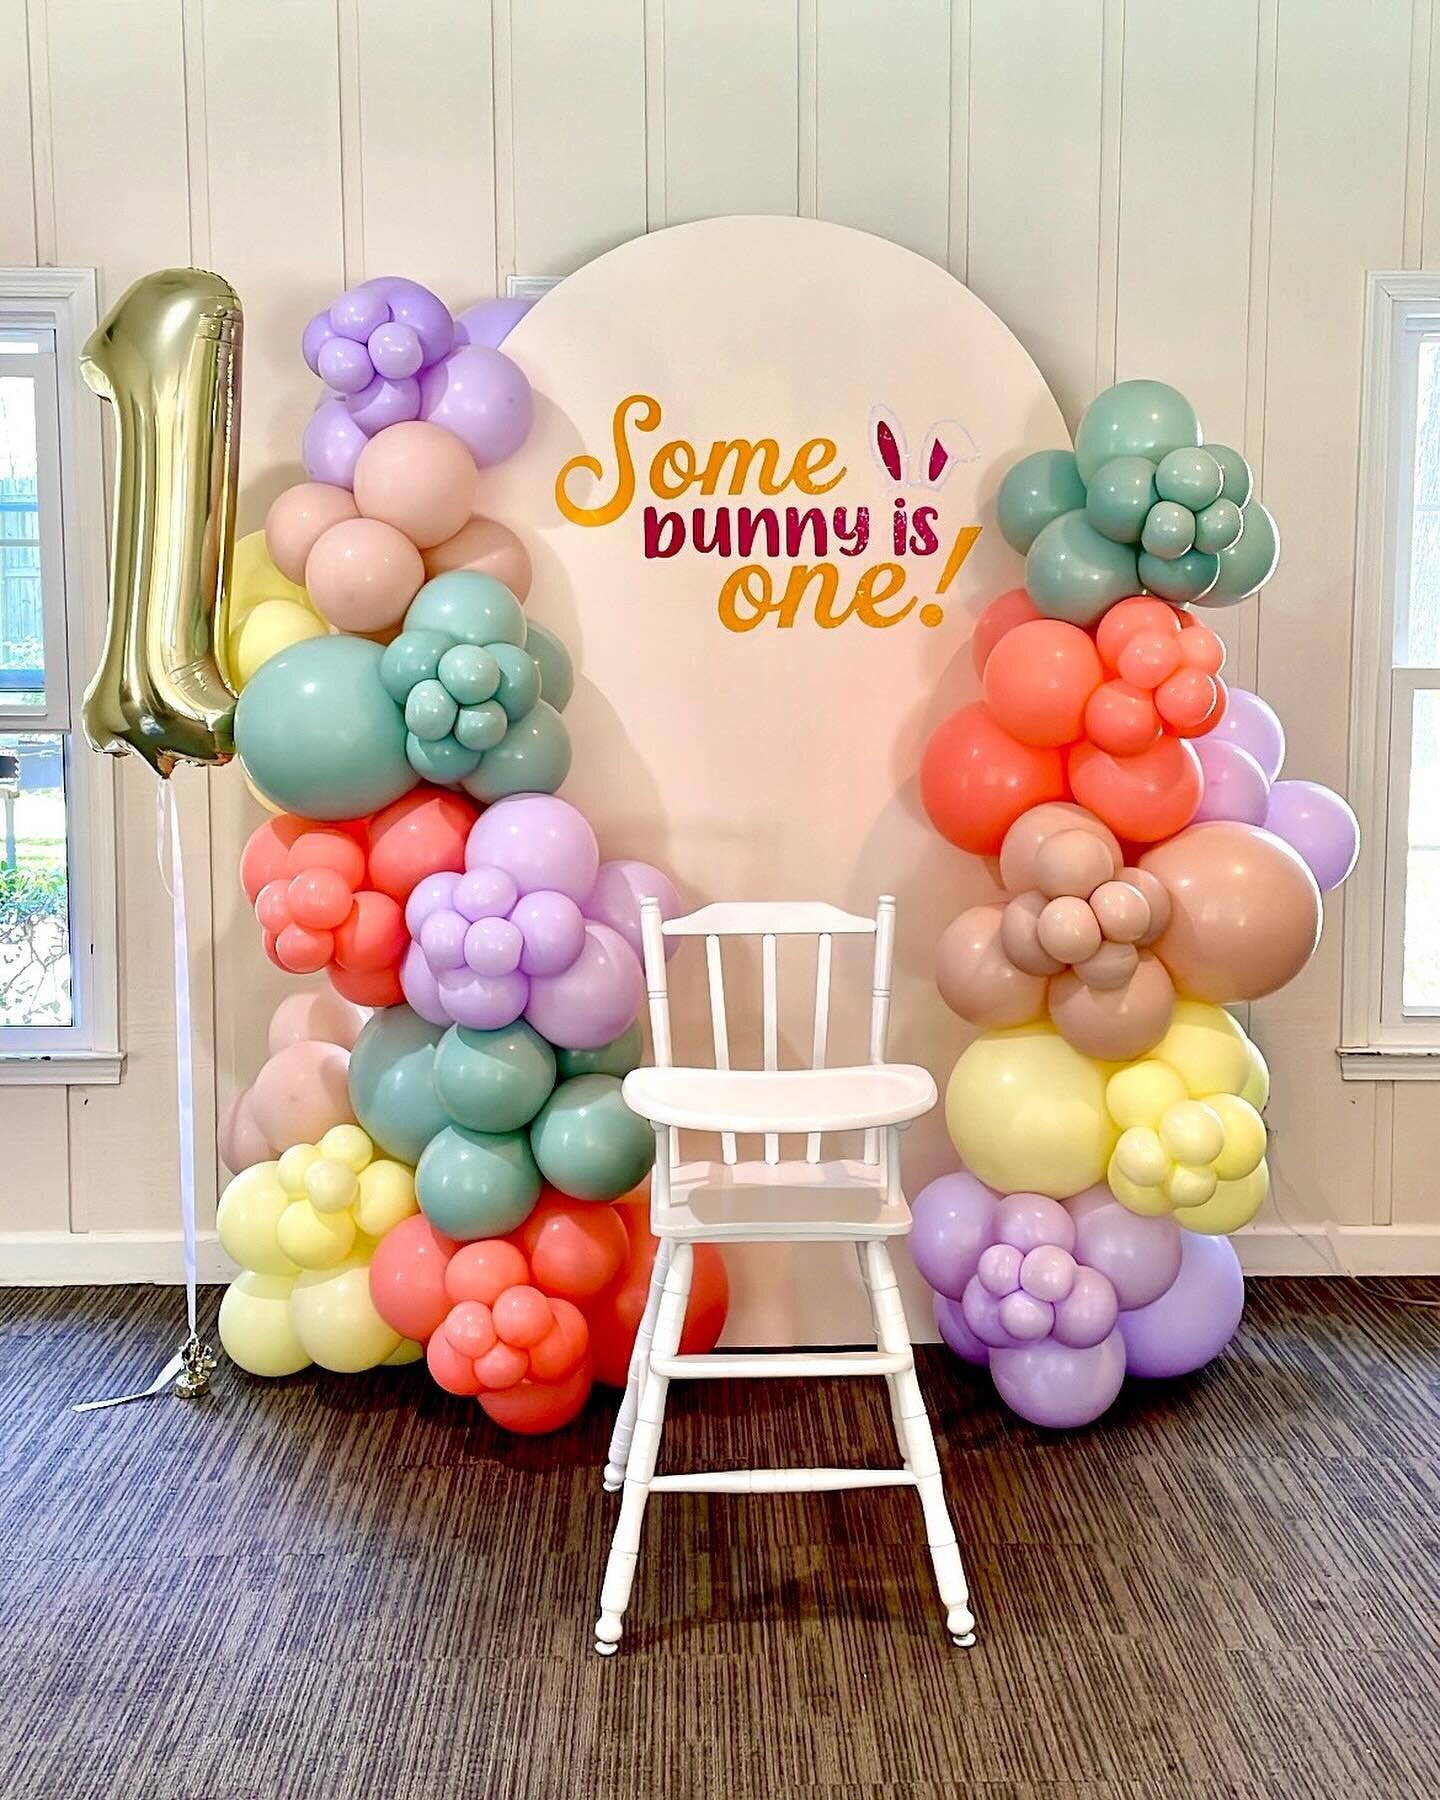 Some 𝓫𝓾𝓷𝓷𝔂 is one!🐰🤍
-
High Chair Rental $35 
7&rsquo; Arch Backdrop $150
Helium &ldquo;One&rdquo; Balloon $10
15ft Standard Garland $360
+ $2.50 per mile delivery 

#somebunnyisone #somebunnyisturningone #easterballoons #pastelballoons #first